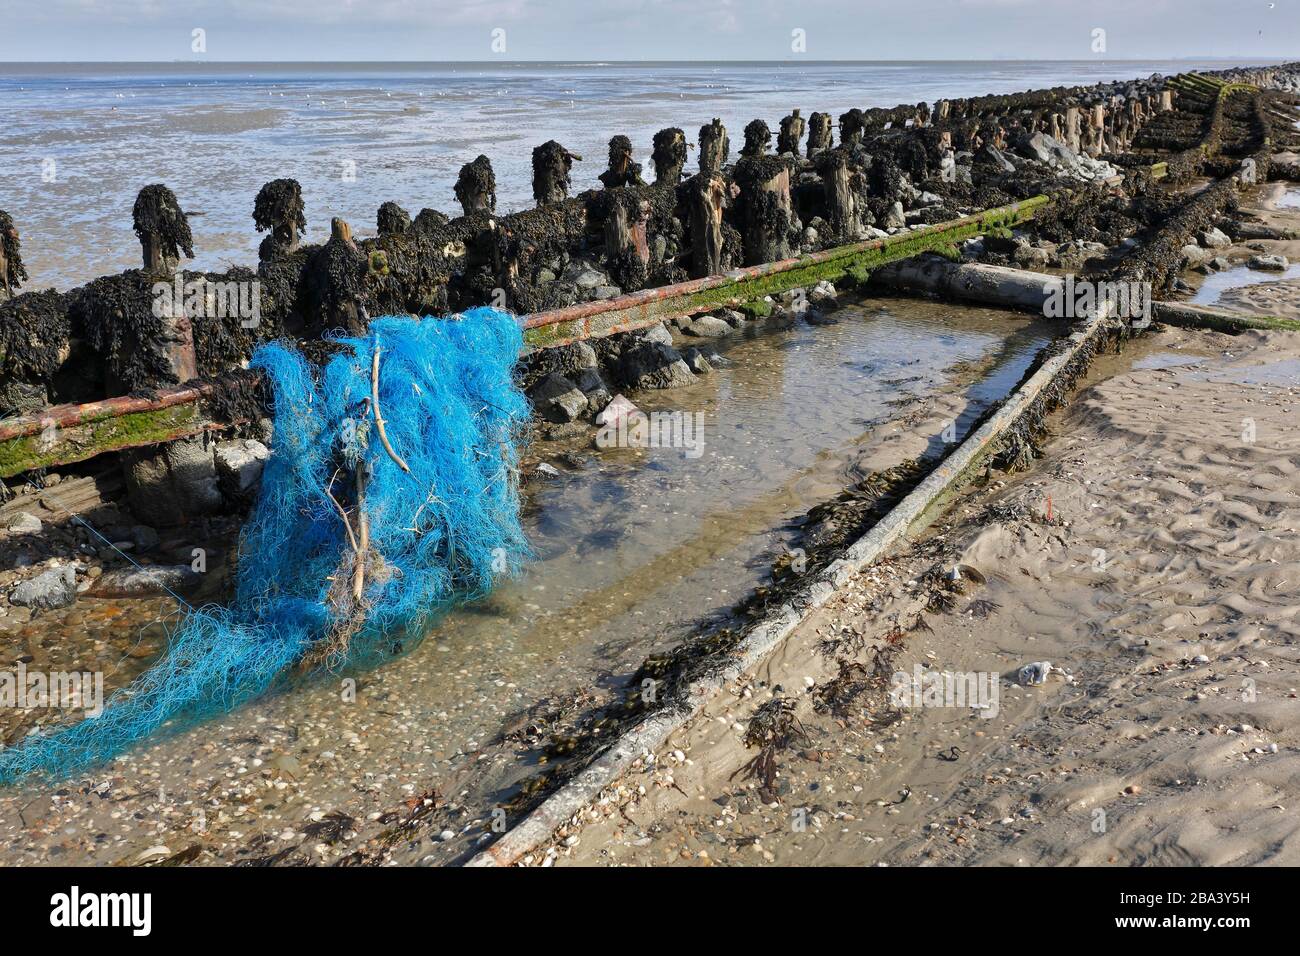 Ailing track systems on the Minsener Oog power station with residual grid, marine waste, Lower Saxony Wadden Sea National Park, Lower Saxony, Germany Stock Photo